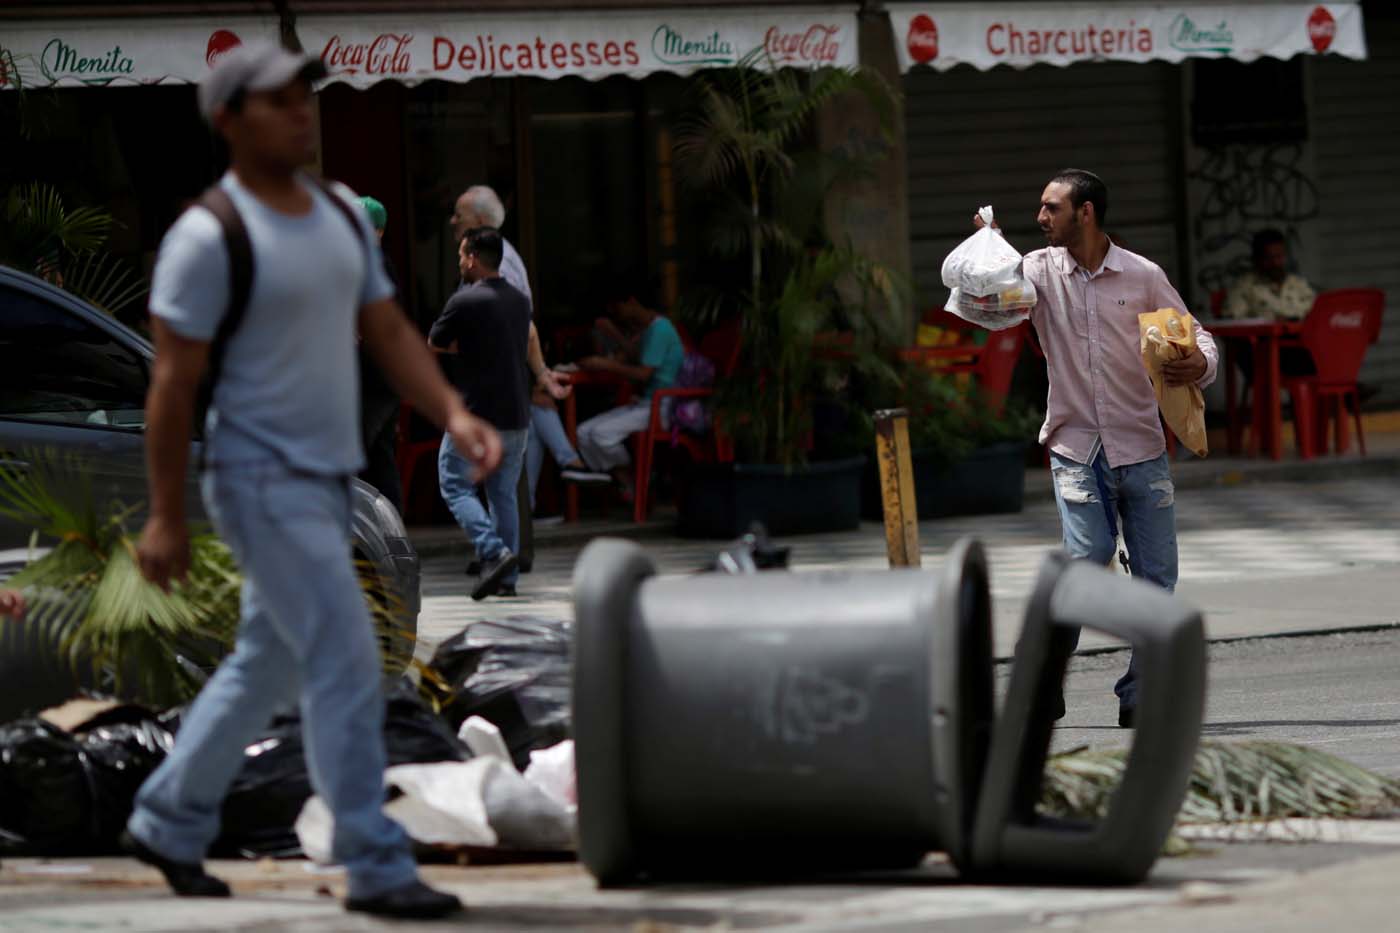 People walk through a barricade after a strike called to protest against Venezuelan President Nicolas Maduro's government in Caracas, Venezuela, July 29, 2017. REUTERS/Ueslei Marcelino